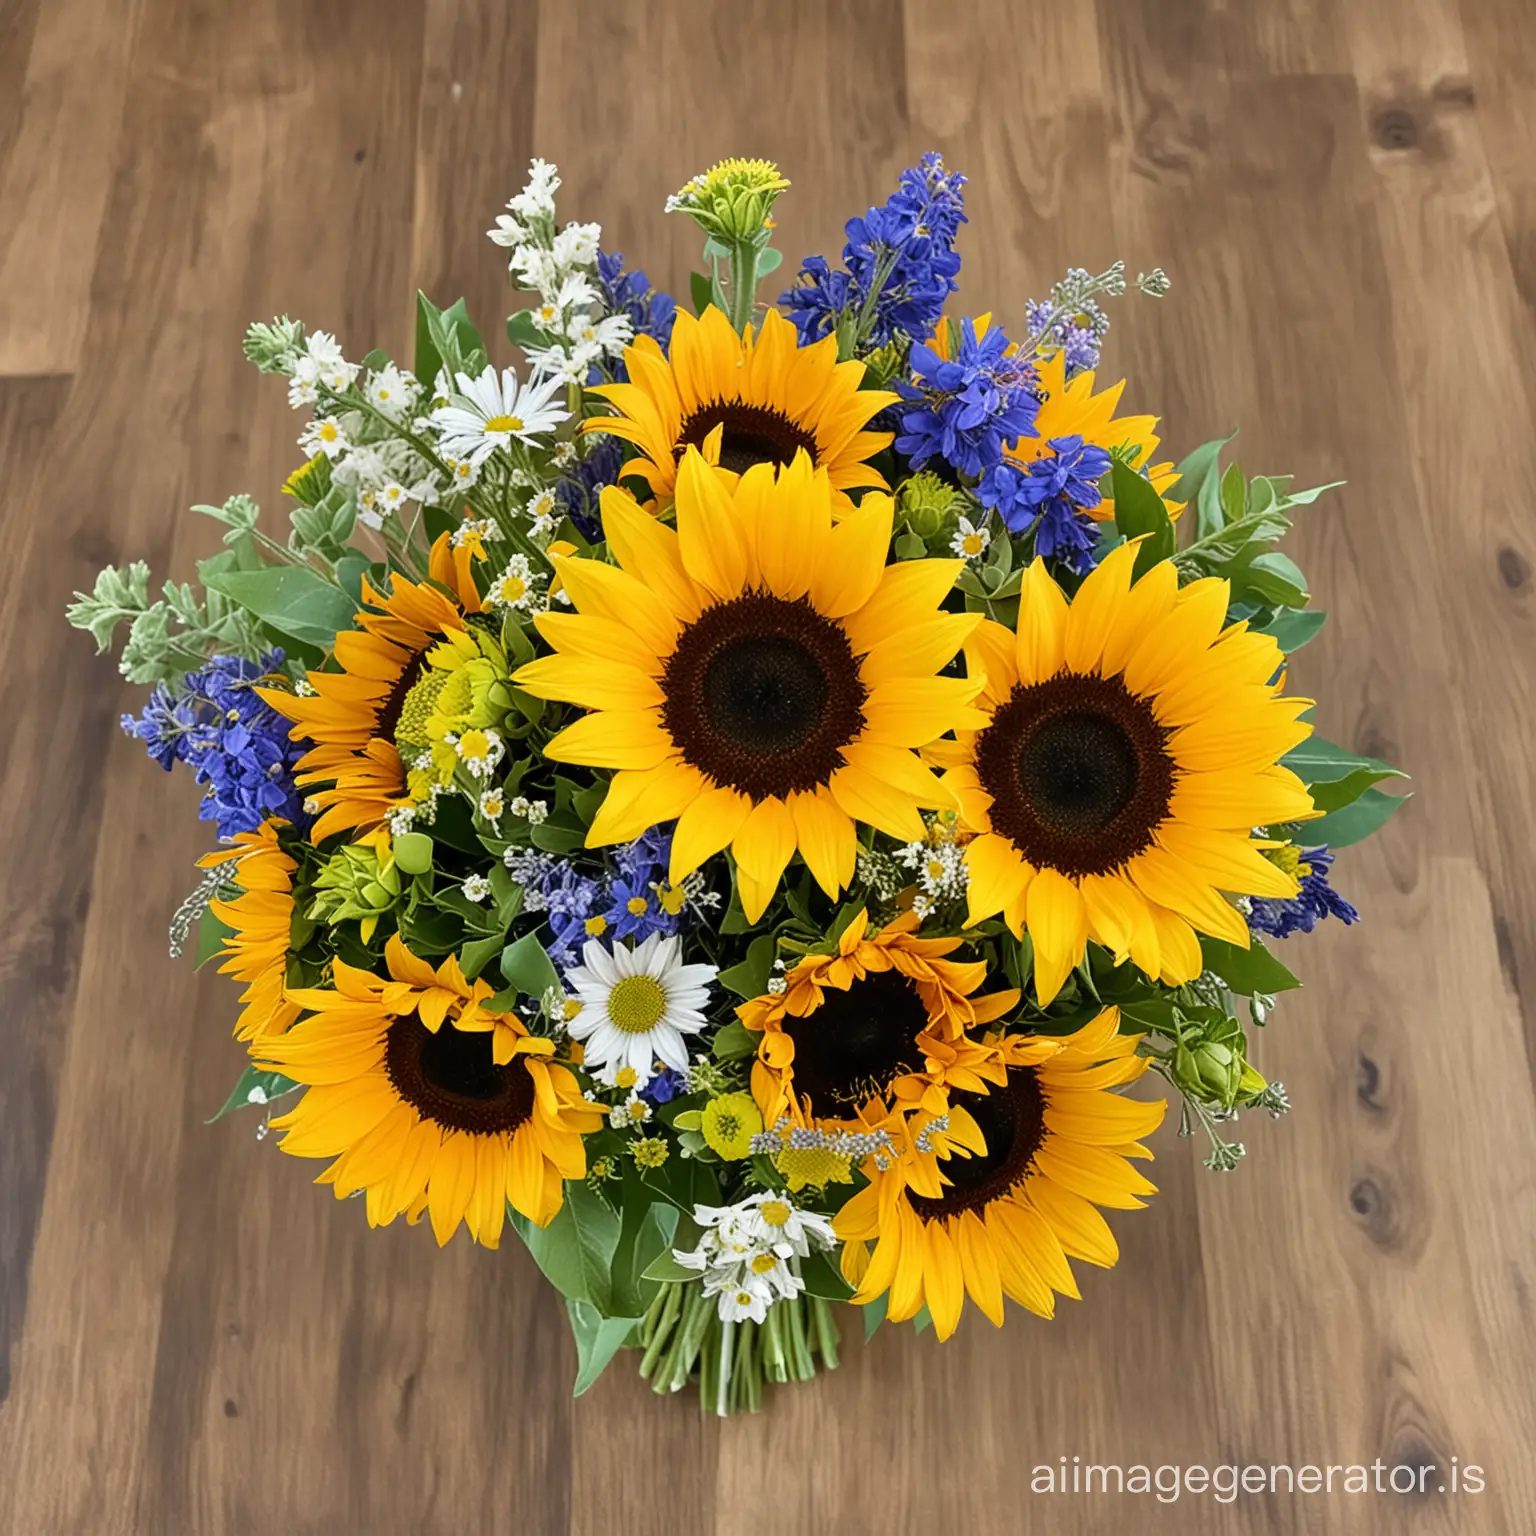 Vibrant-Sunflower-and-Wildflower-Bouquet-Burst-of-Natures-Colors